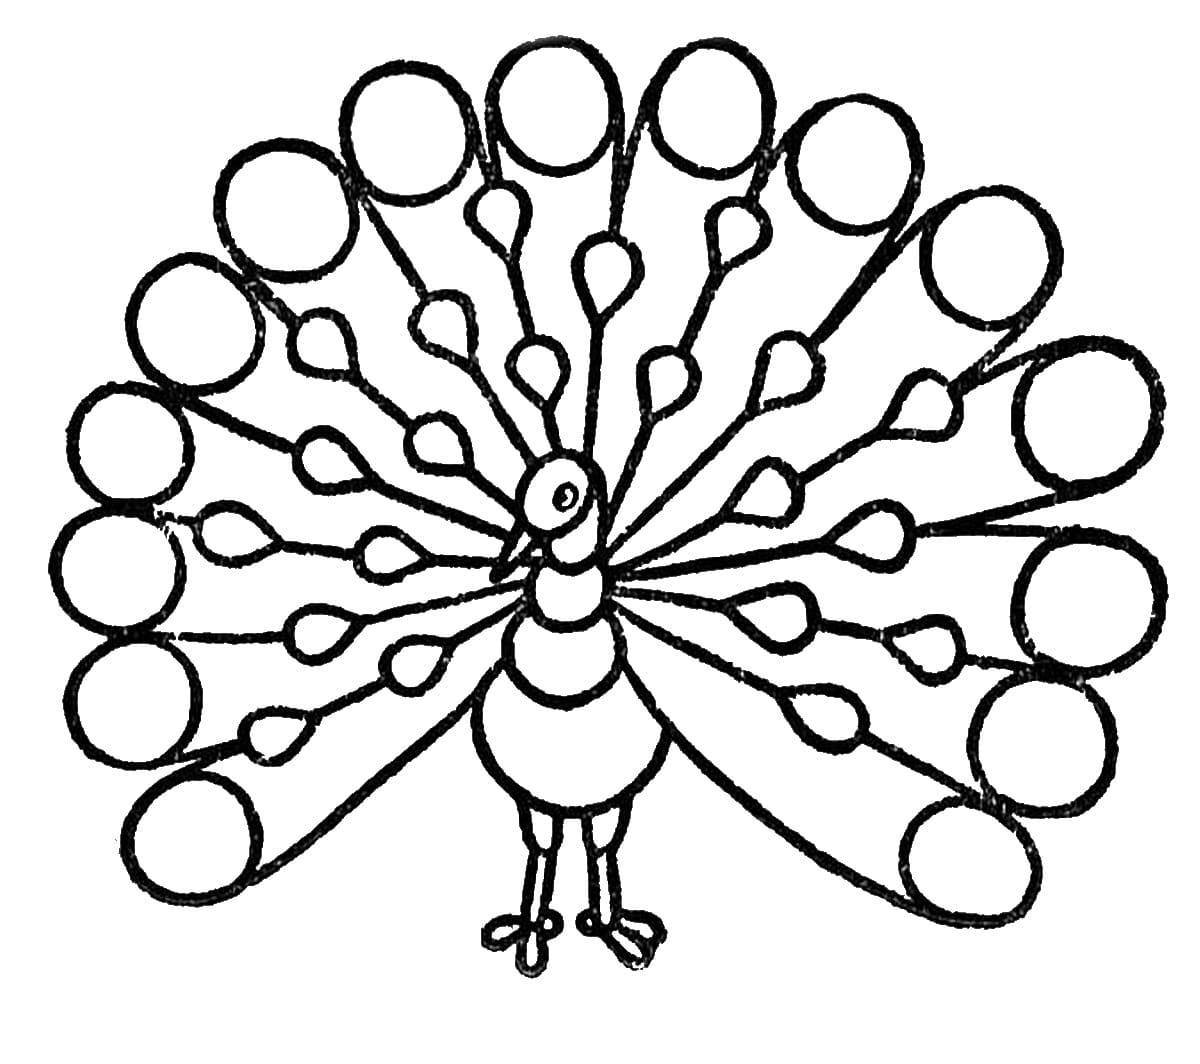 Playful peacock coloring page for kids